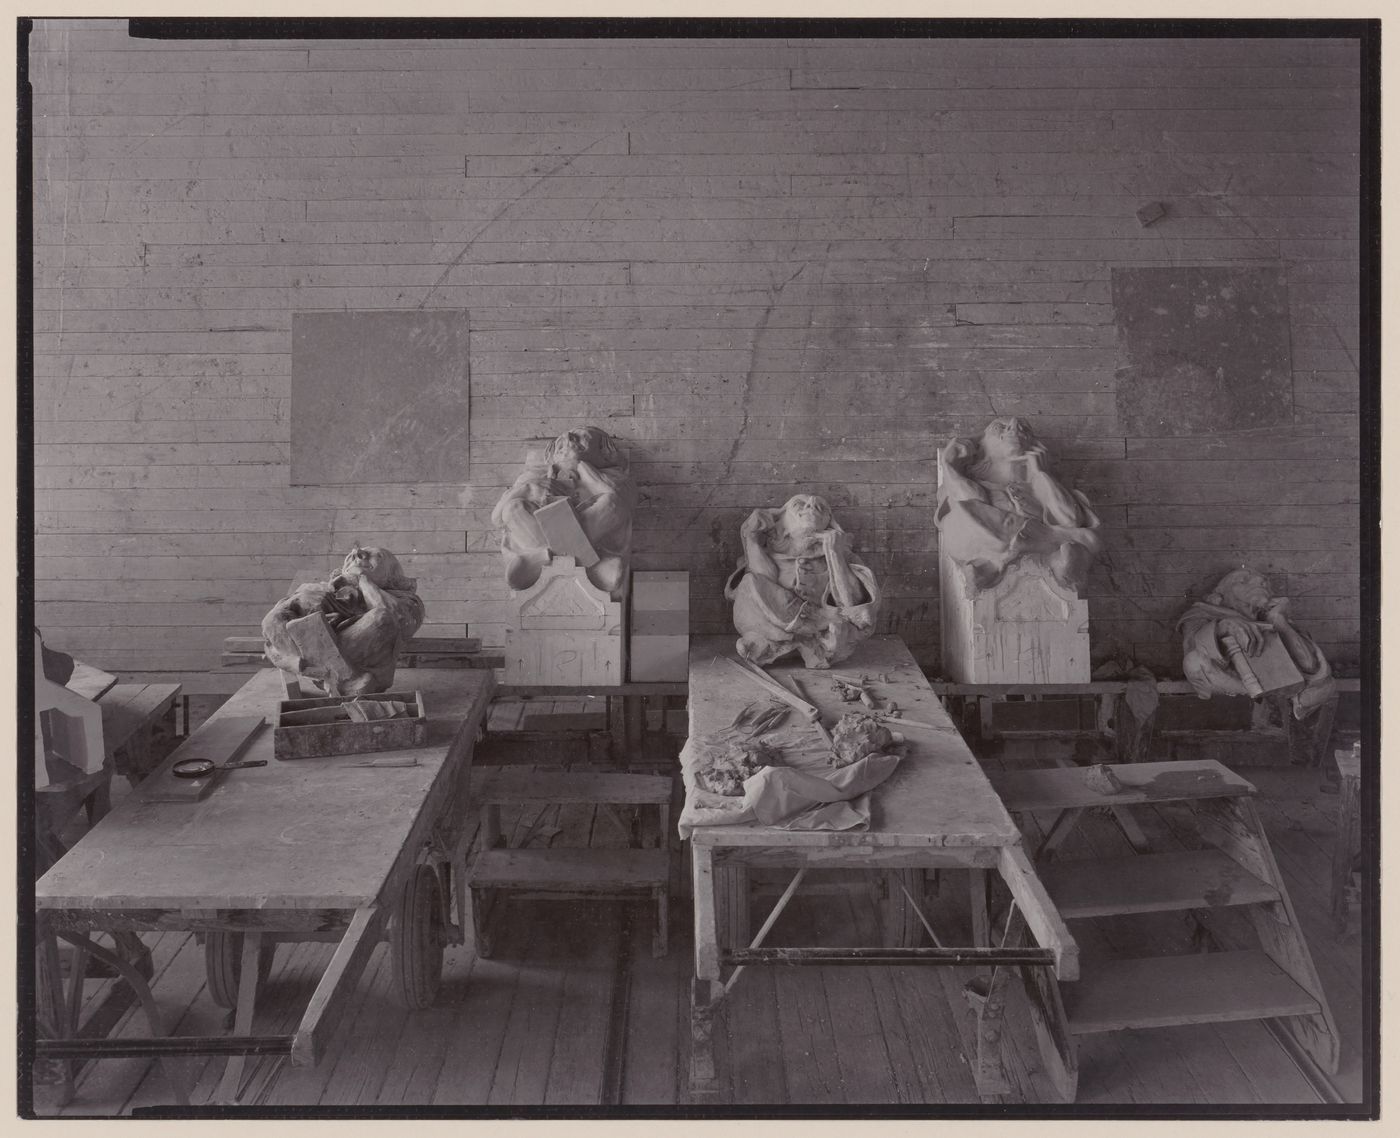 Interior view of terracotta figures on tables in terracotta factory, Lincoln, California